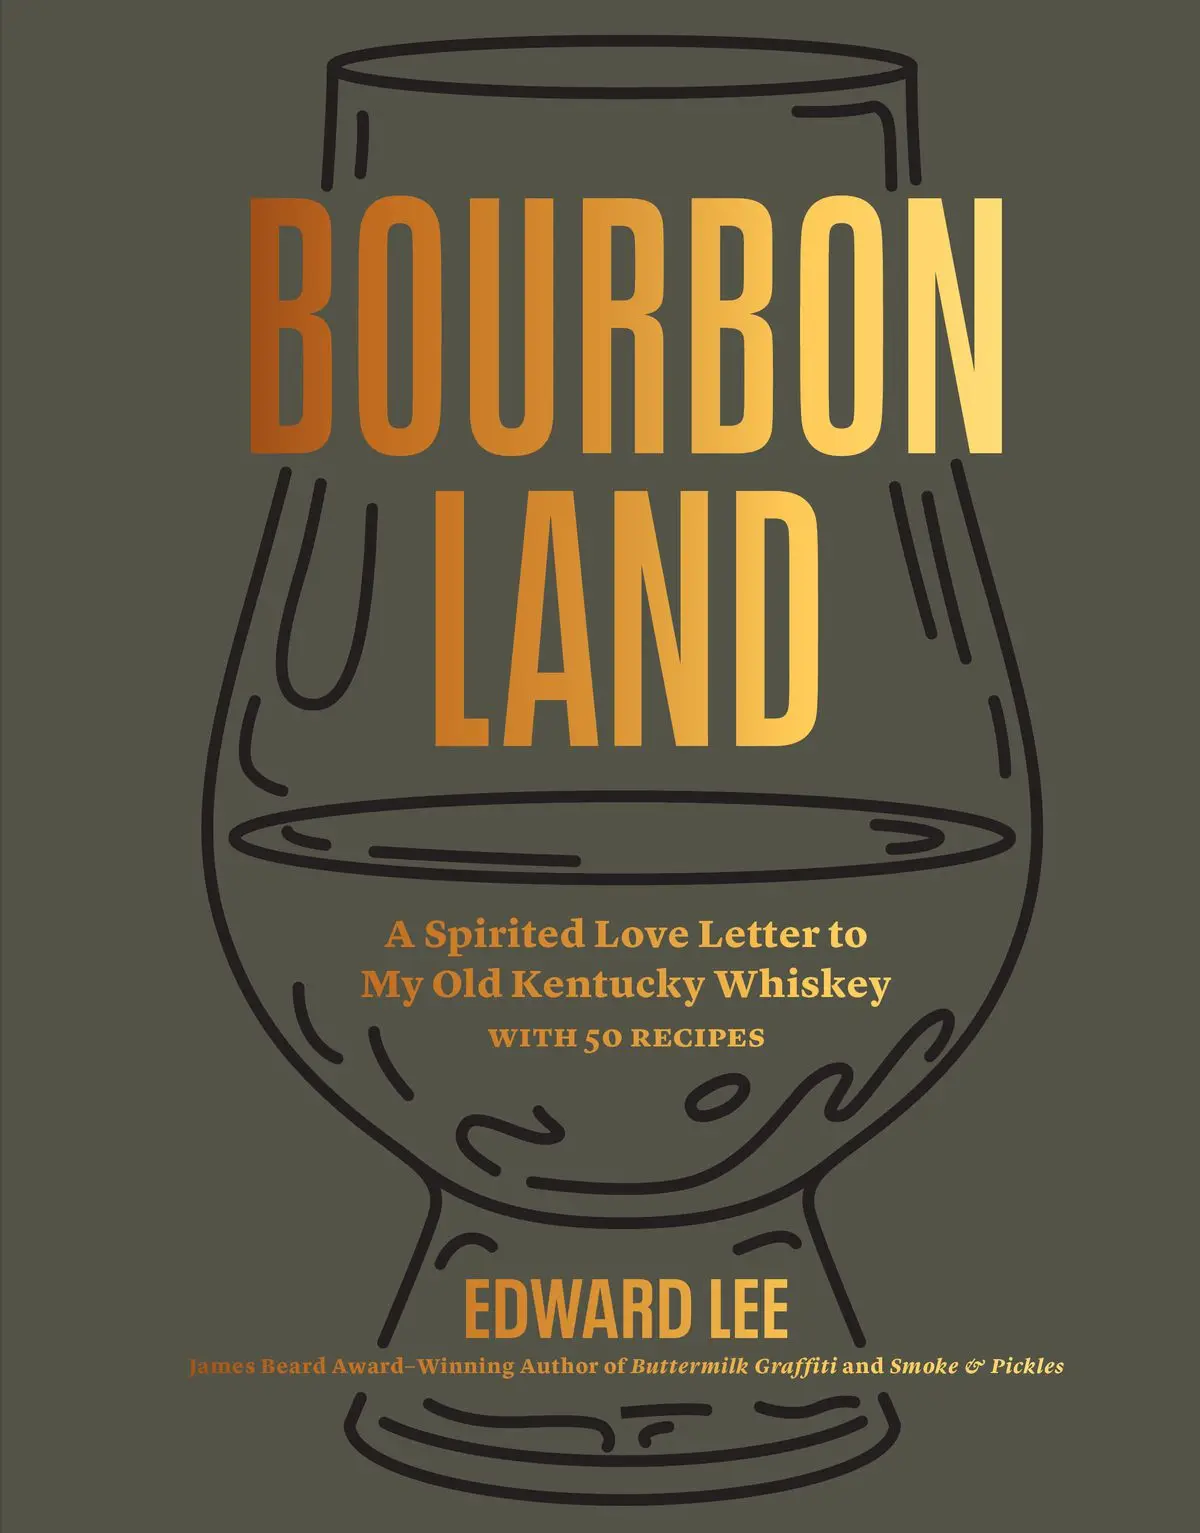 The cover of Bourbon Land